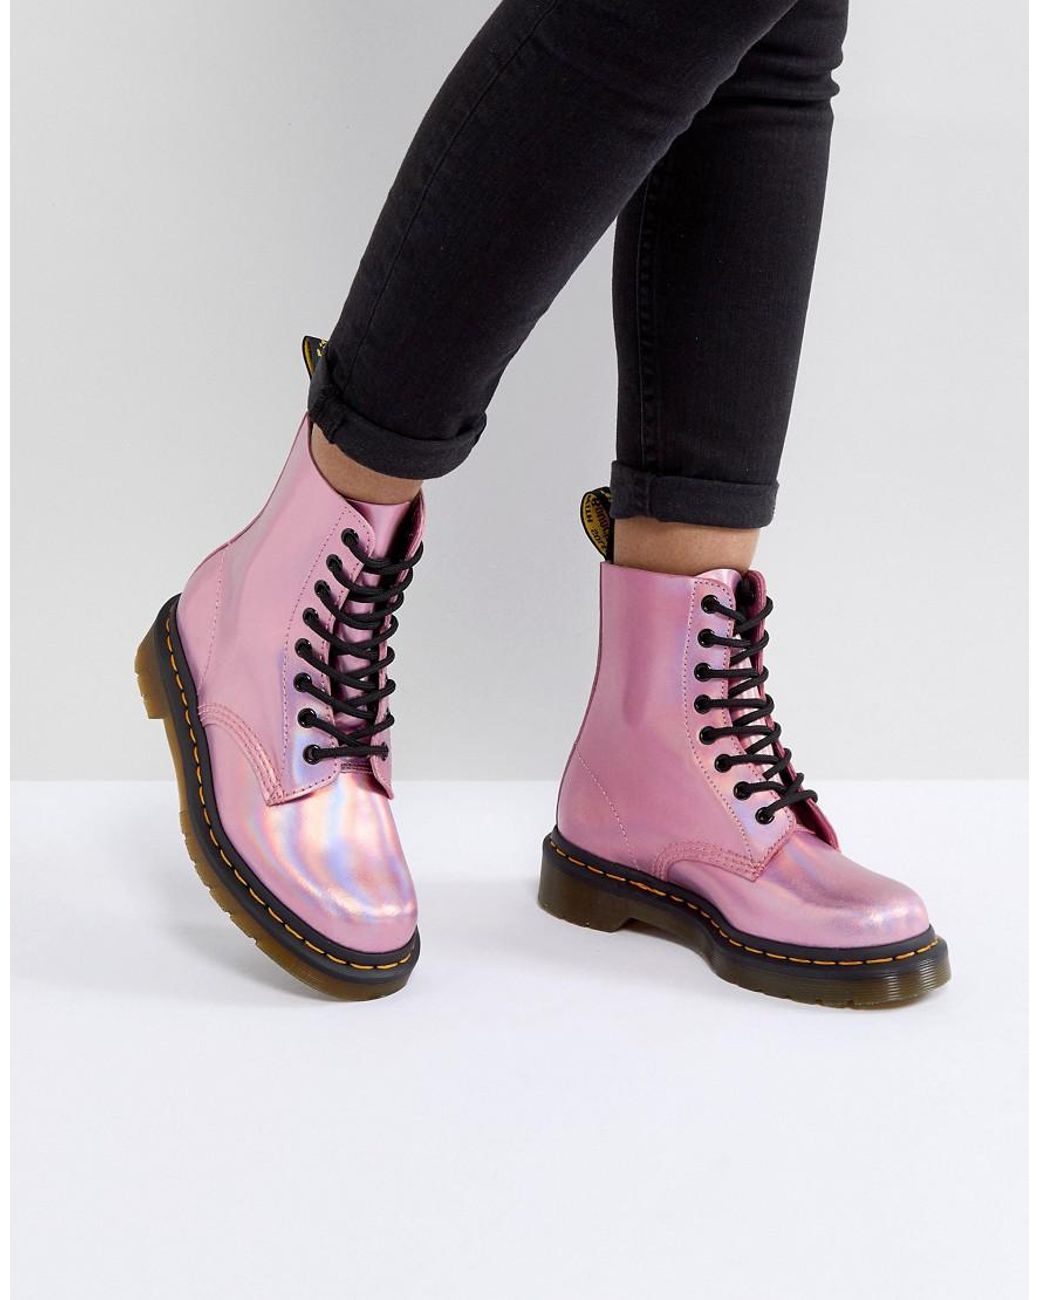 Dr. Martens Leather Holographic Pink Lace Up Boots | Lyst Australia